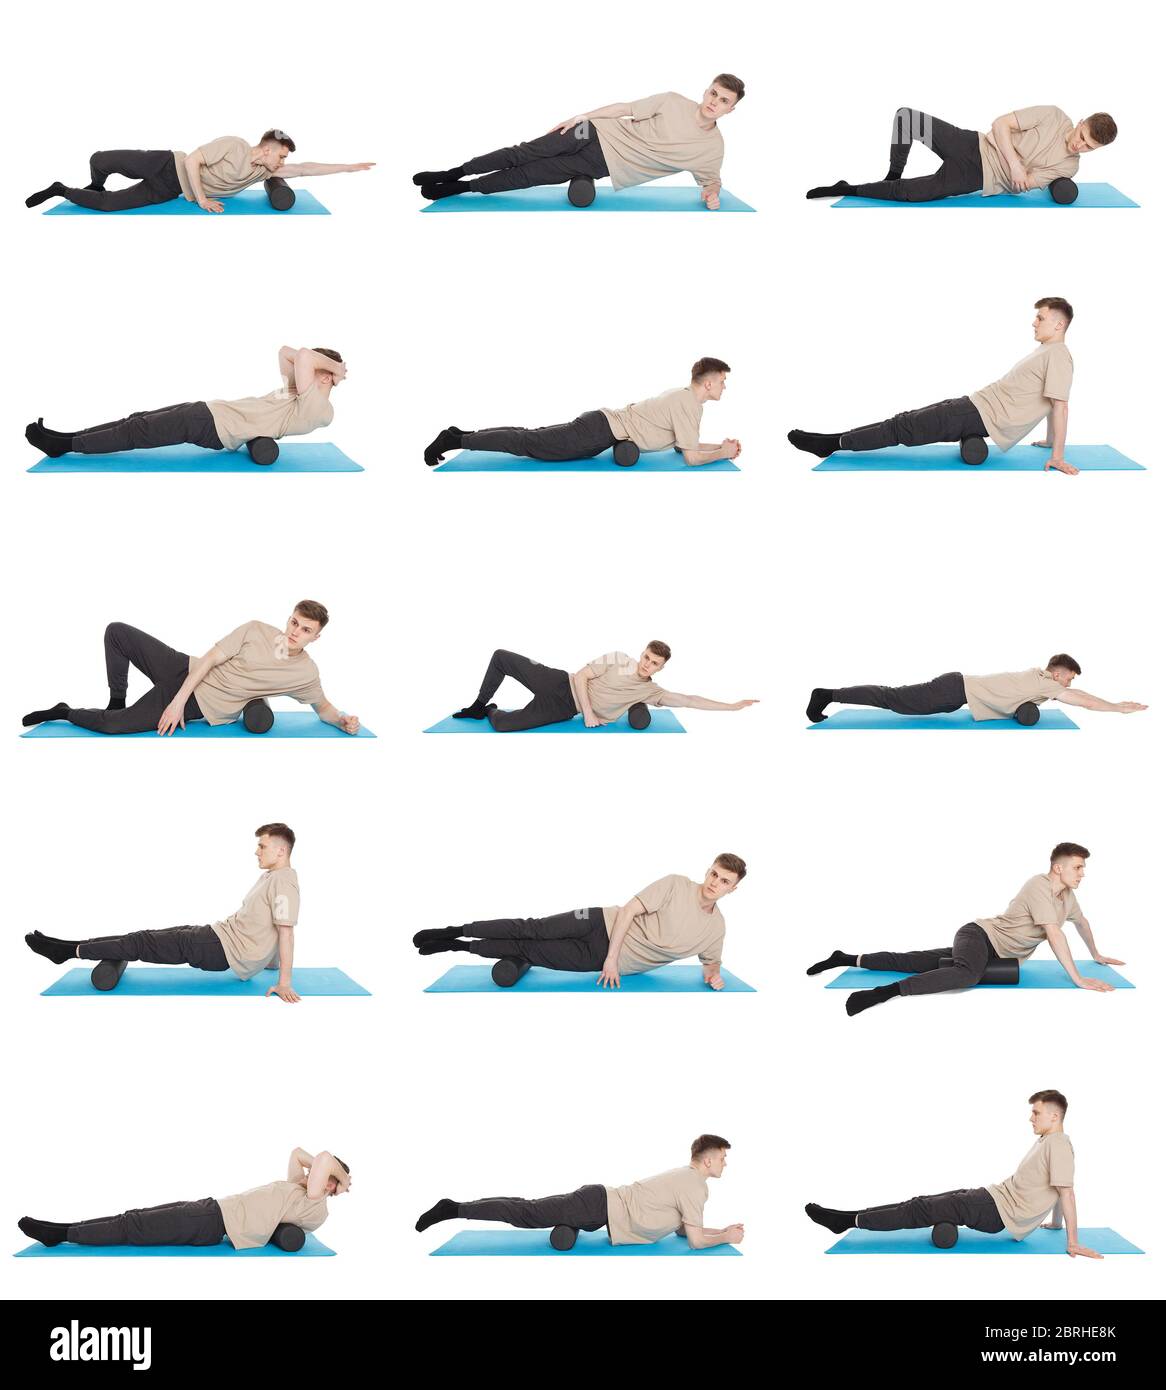 Set Of 15 Exercises Using A Foam Roller For A Myofascial Release Massage Of Trigger Points